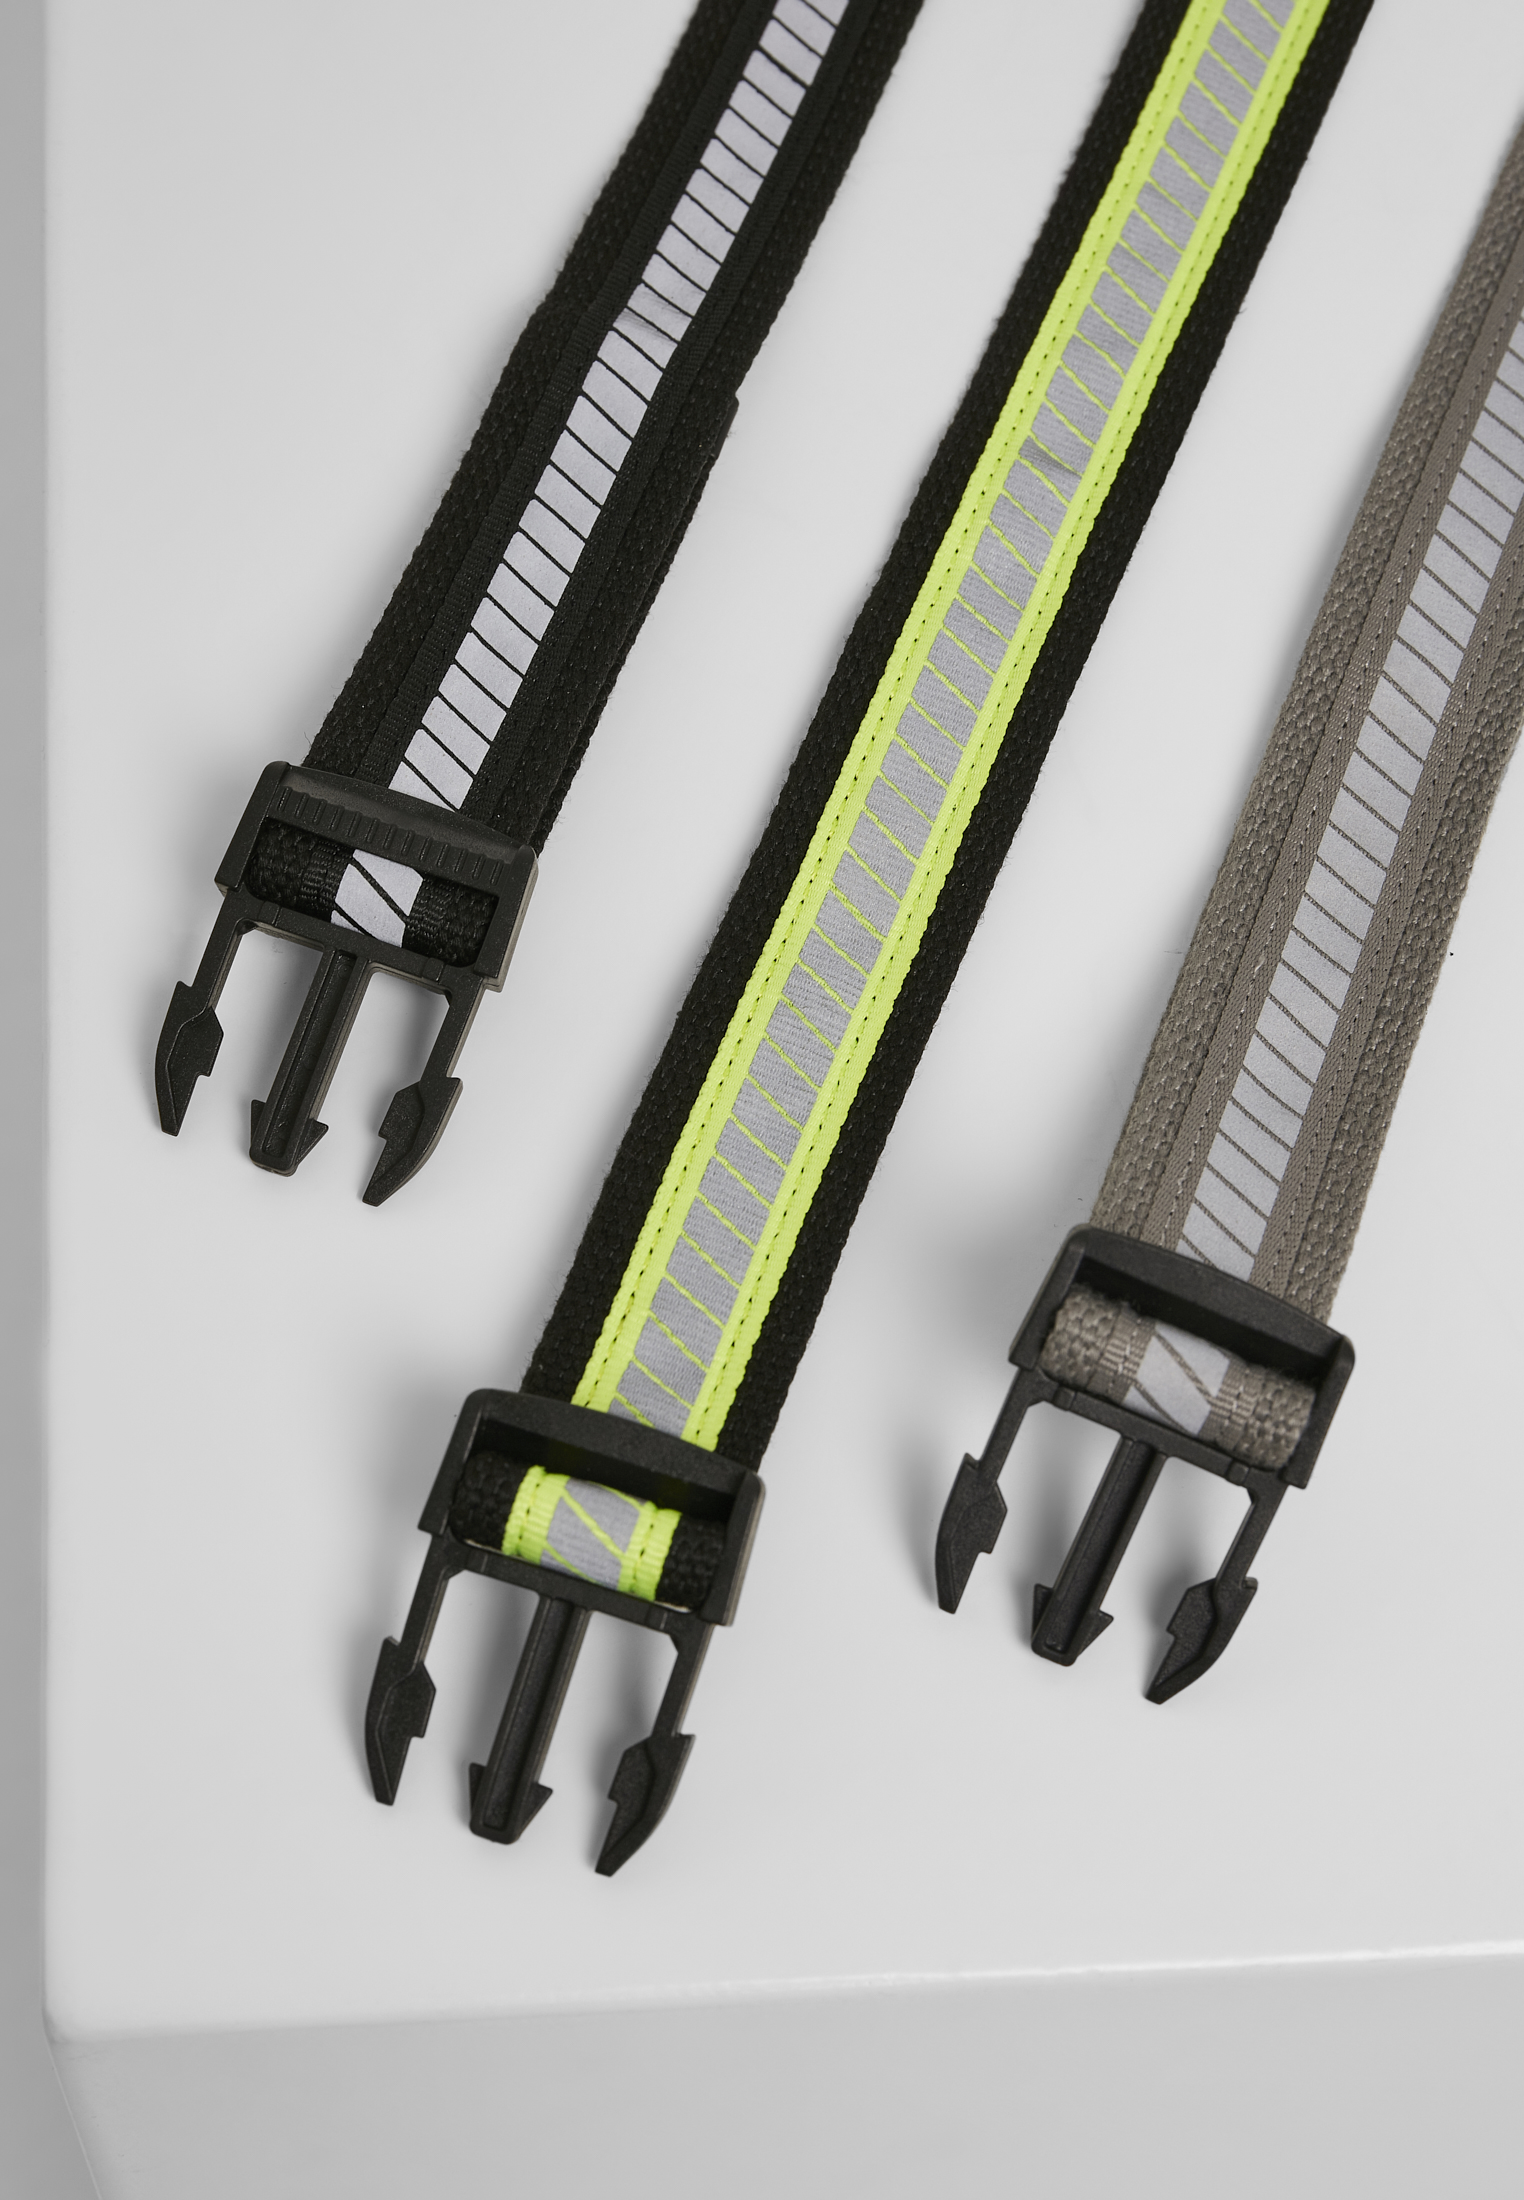 G?rtel Reflective Belt 3-Pack in Farbe blk/neonyellow/silv-blk-gry